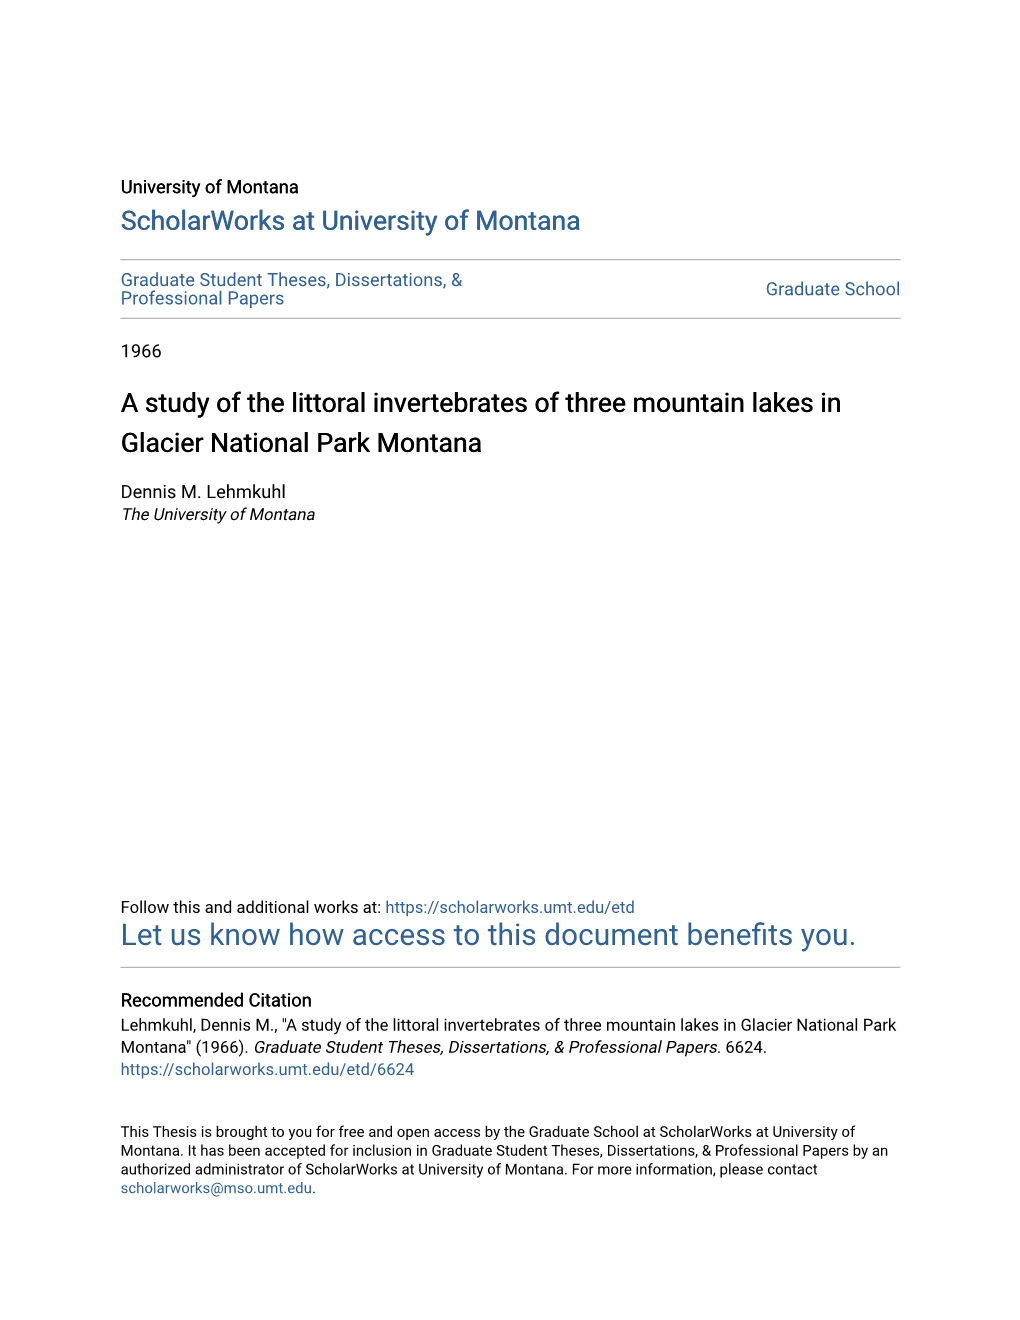 A Study of the Littoral Invertebrates of Three Mountain Lakes in Glacier National Park Montana